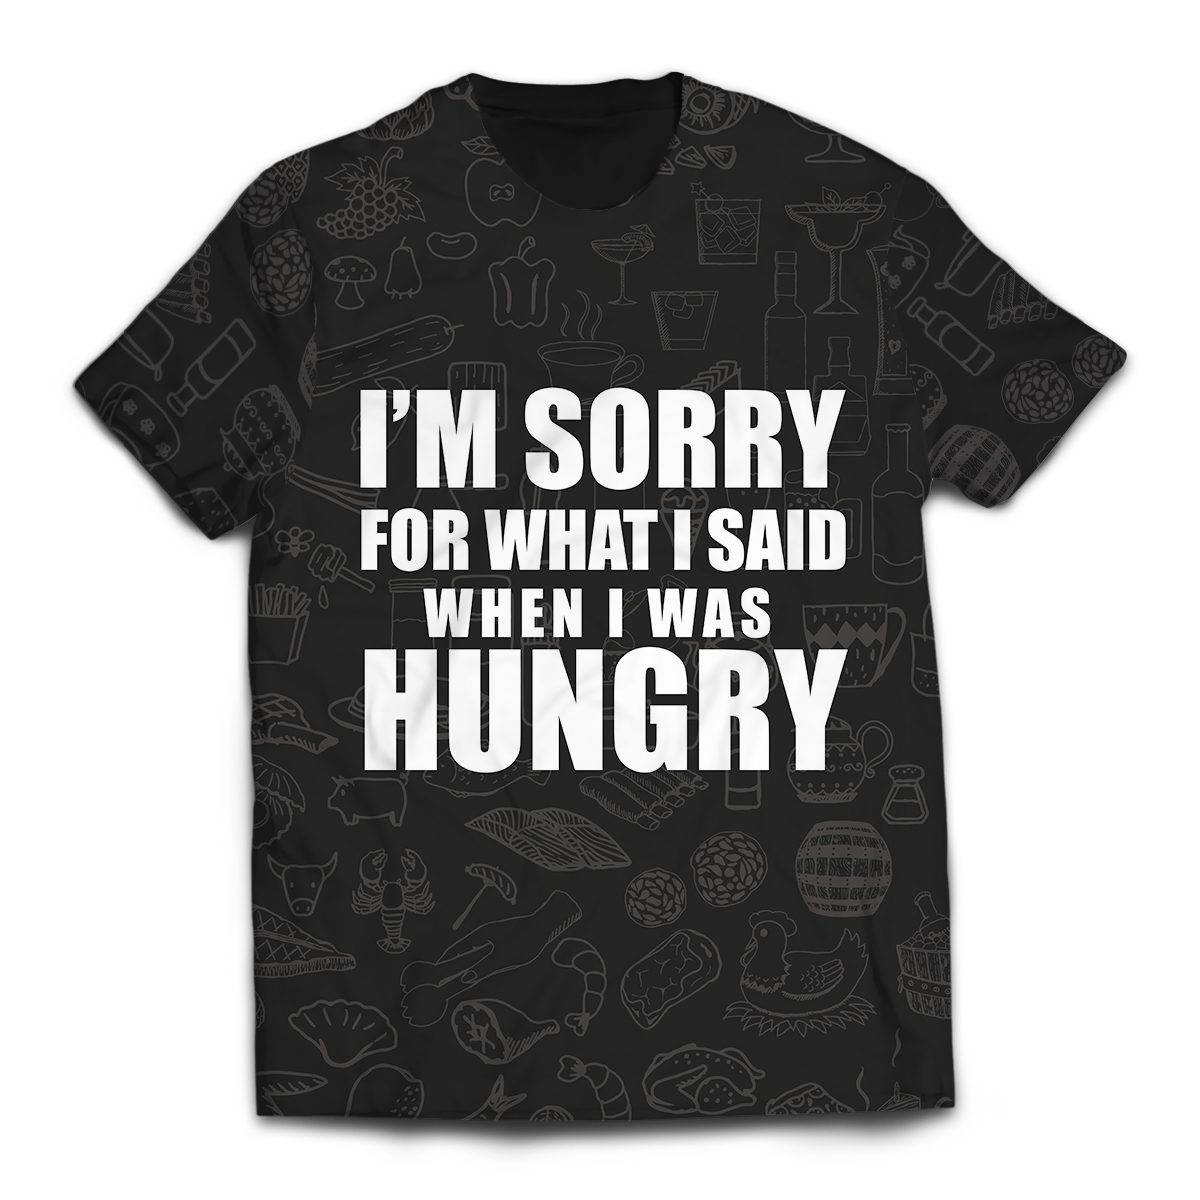 When I Was Hungry Unisex T-Shirt